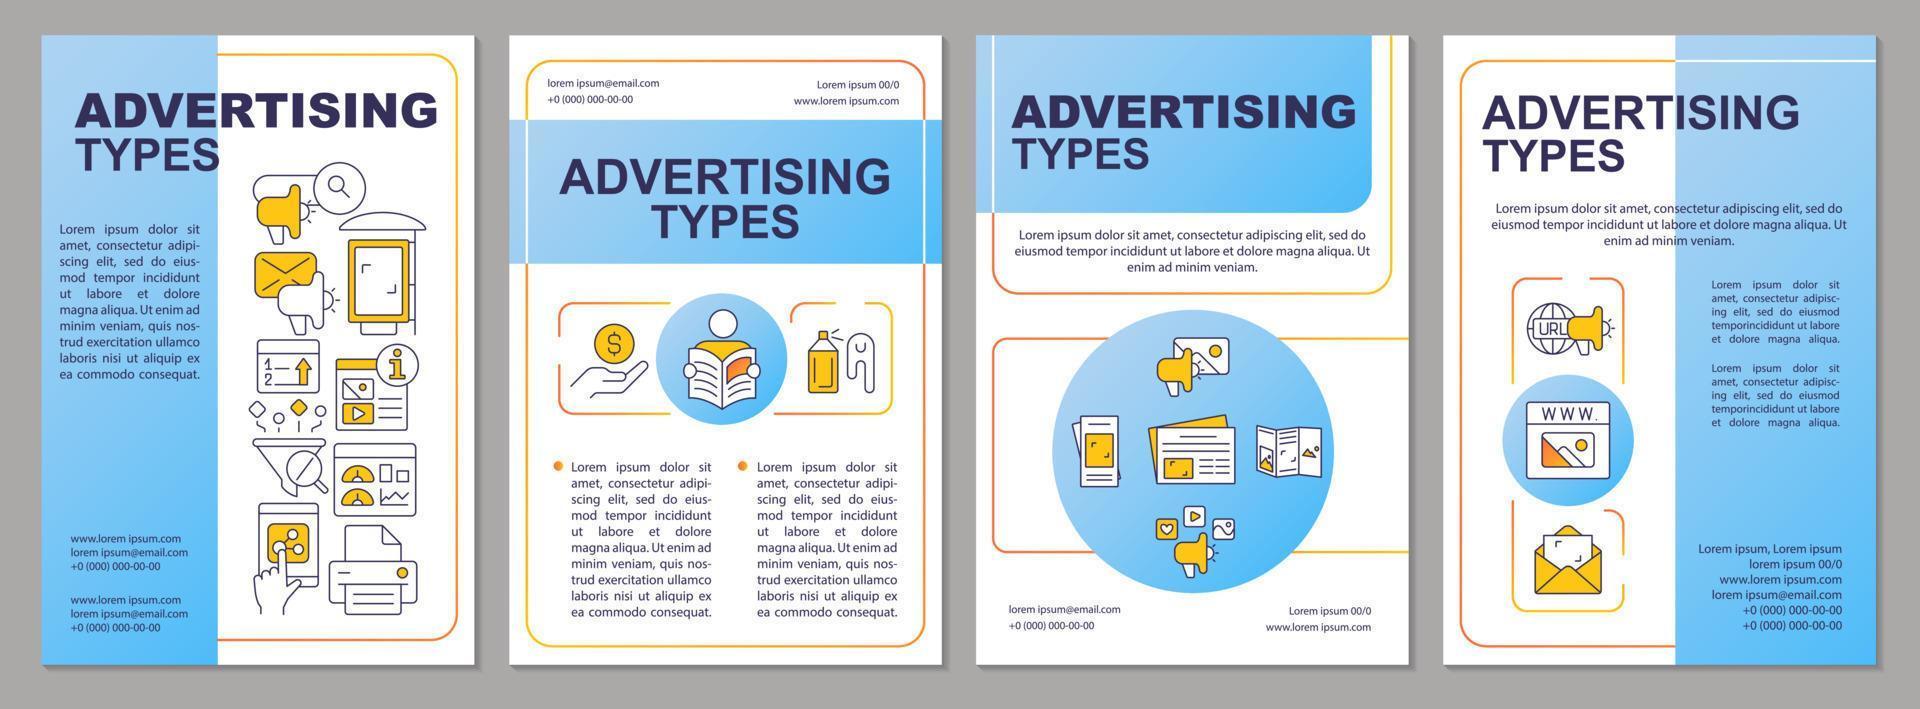 Advertising media channels blue brochure template. Content marketing. Leaflet design with linear icons. Editable 4 vector layouts for presentation, annual reports